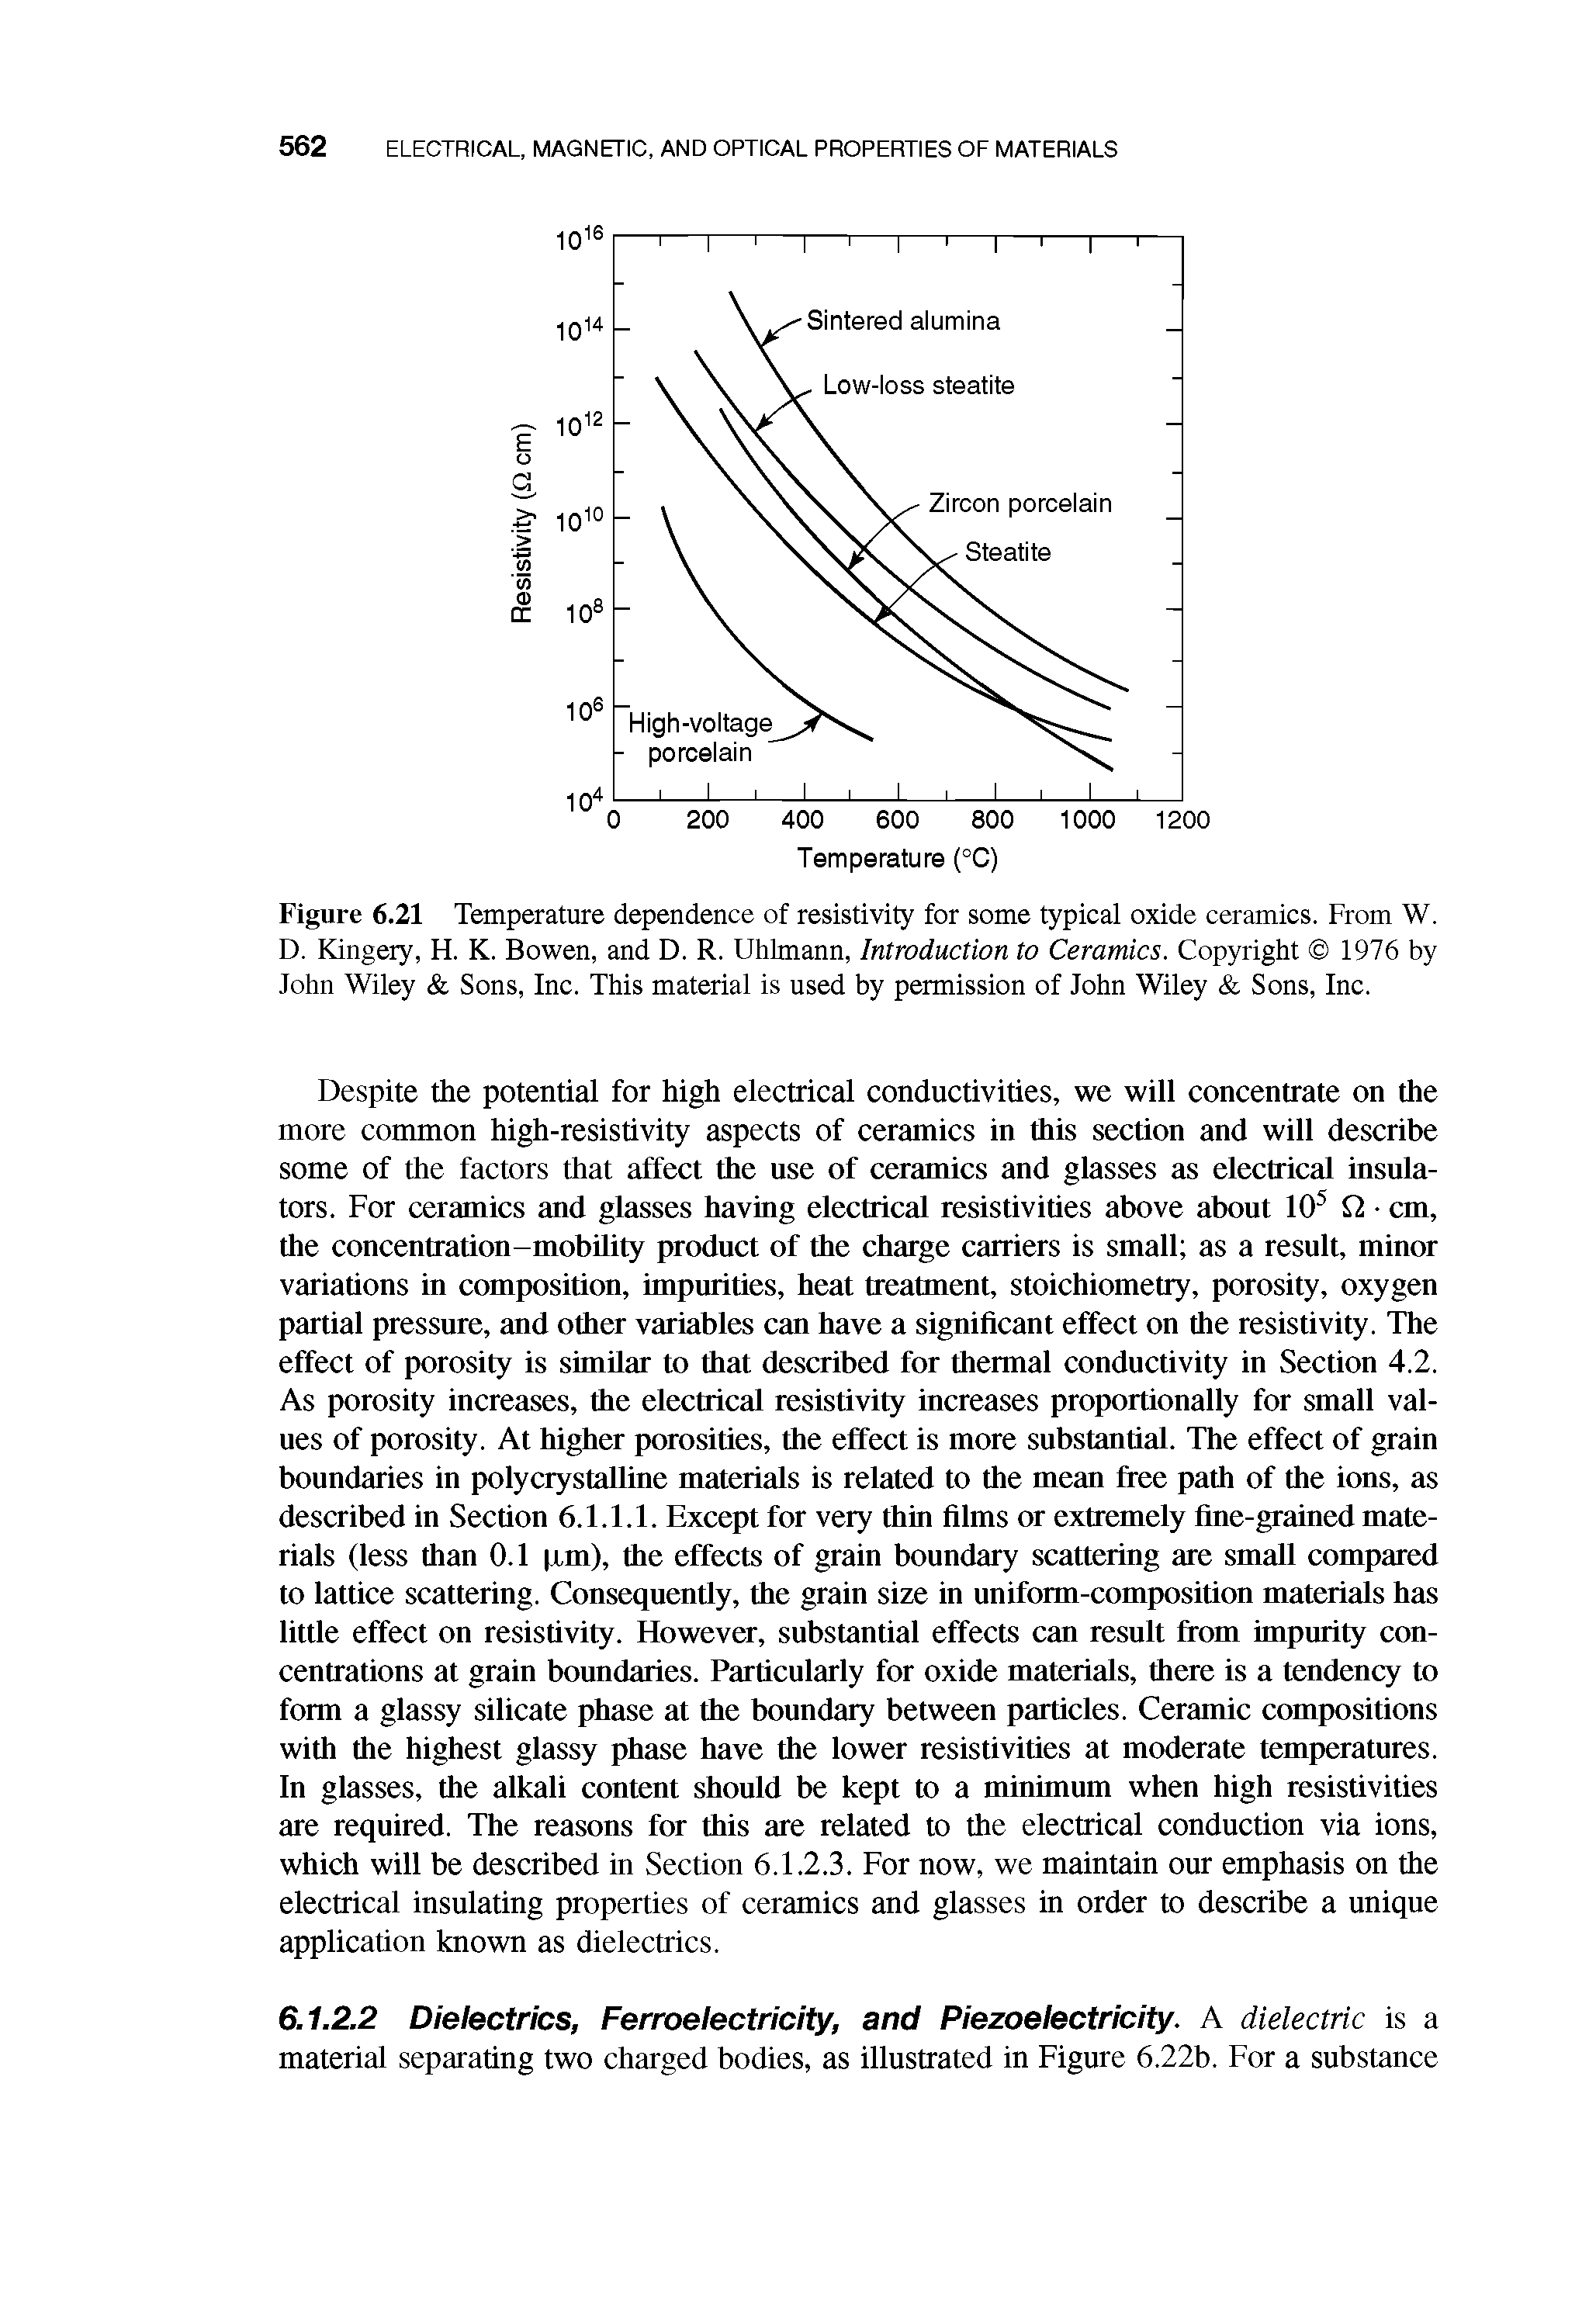 Figure 6.21 Temperature dependence of resistivity for some typical oxide ceramics. From W. D. Kingery, H. K. Bowen, and D. R. Uhknann, Introduction to Ceramics. Copyright 1976 by John Wiley Sons, Inc. This material is used by permission of John Wiley Sons, Inc.